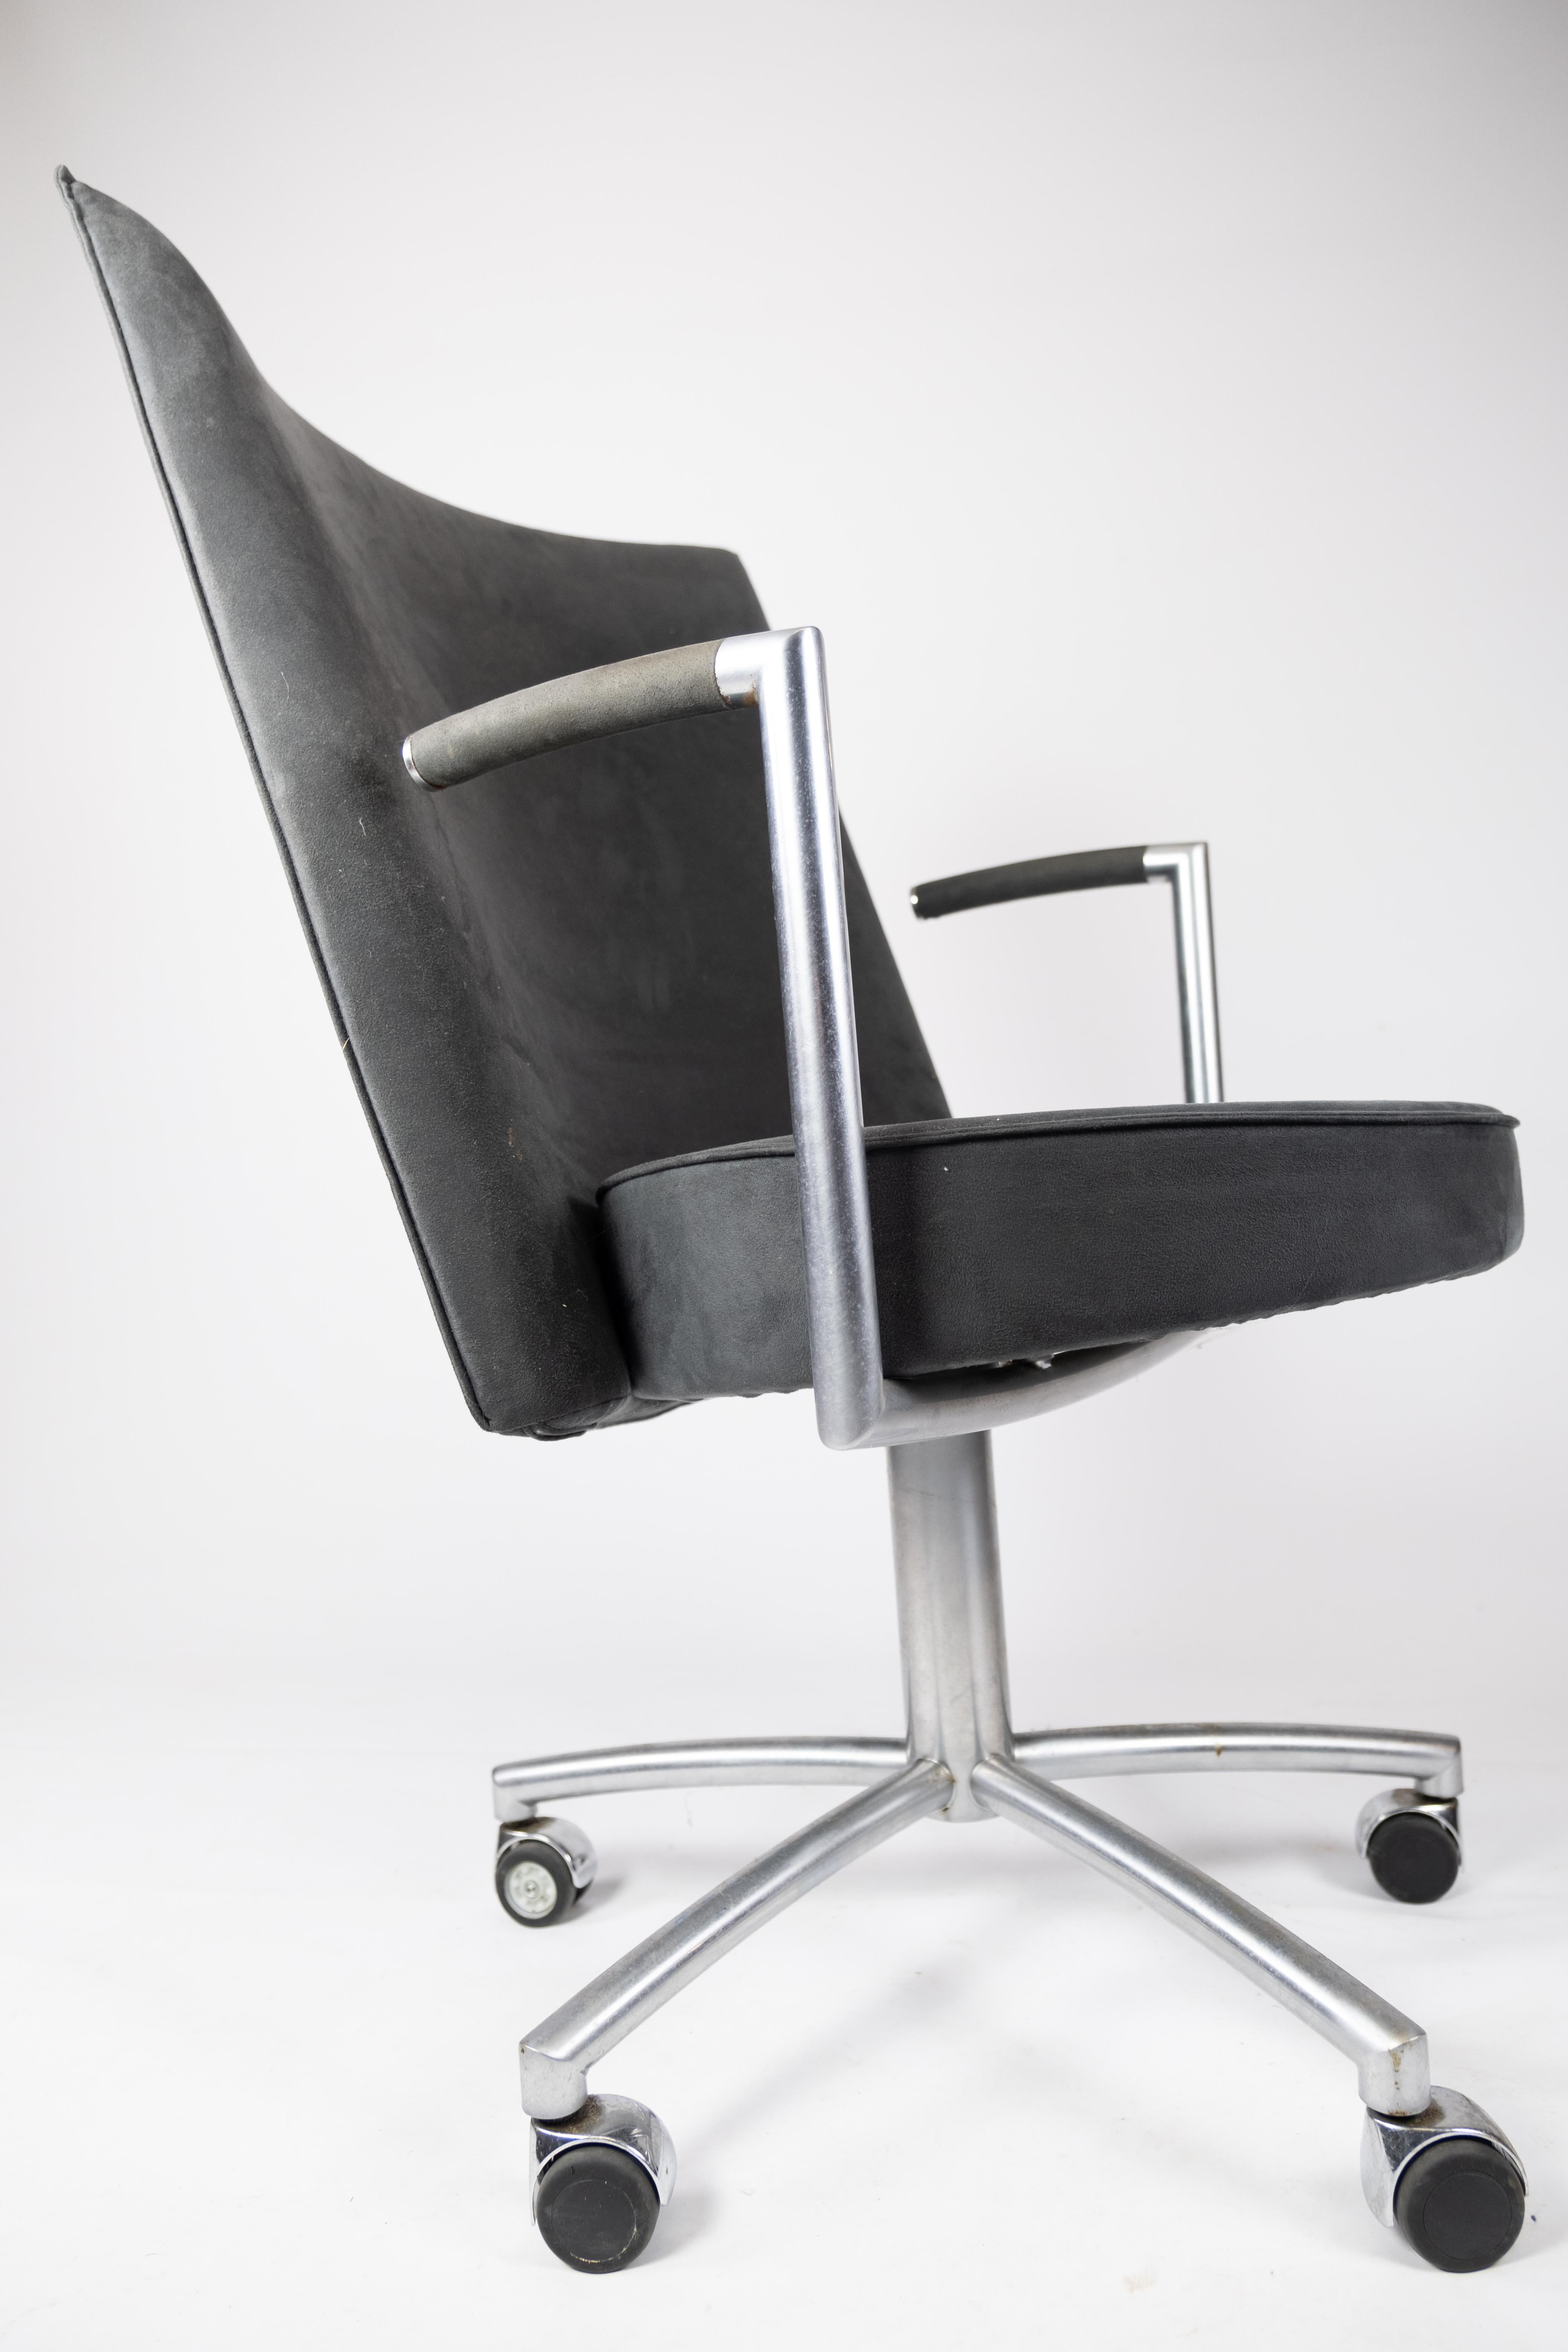 Office Chair, Model EJ70, Upholstered with Dark Grey Fabric by Johannes Foersom In Good Condition For Sale In Lejre, DK